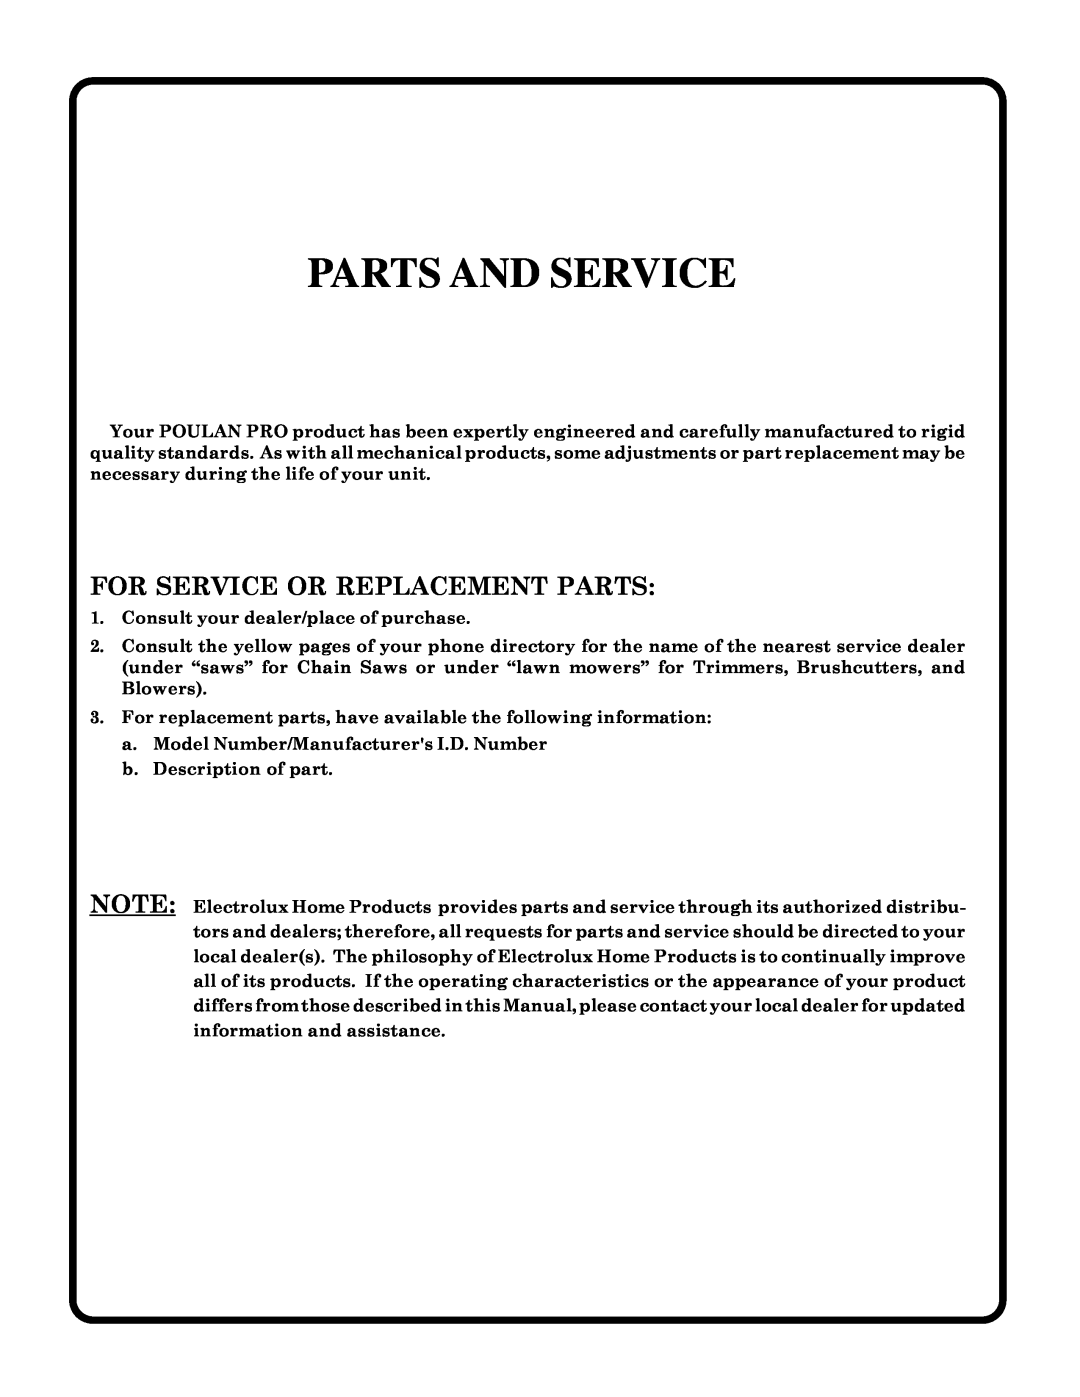 Poulan 177271 owner manual Parts And Service, For Service Or Replacement Parts 